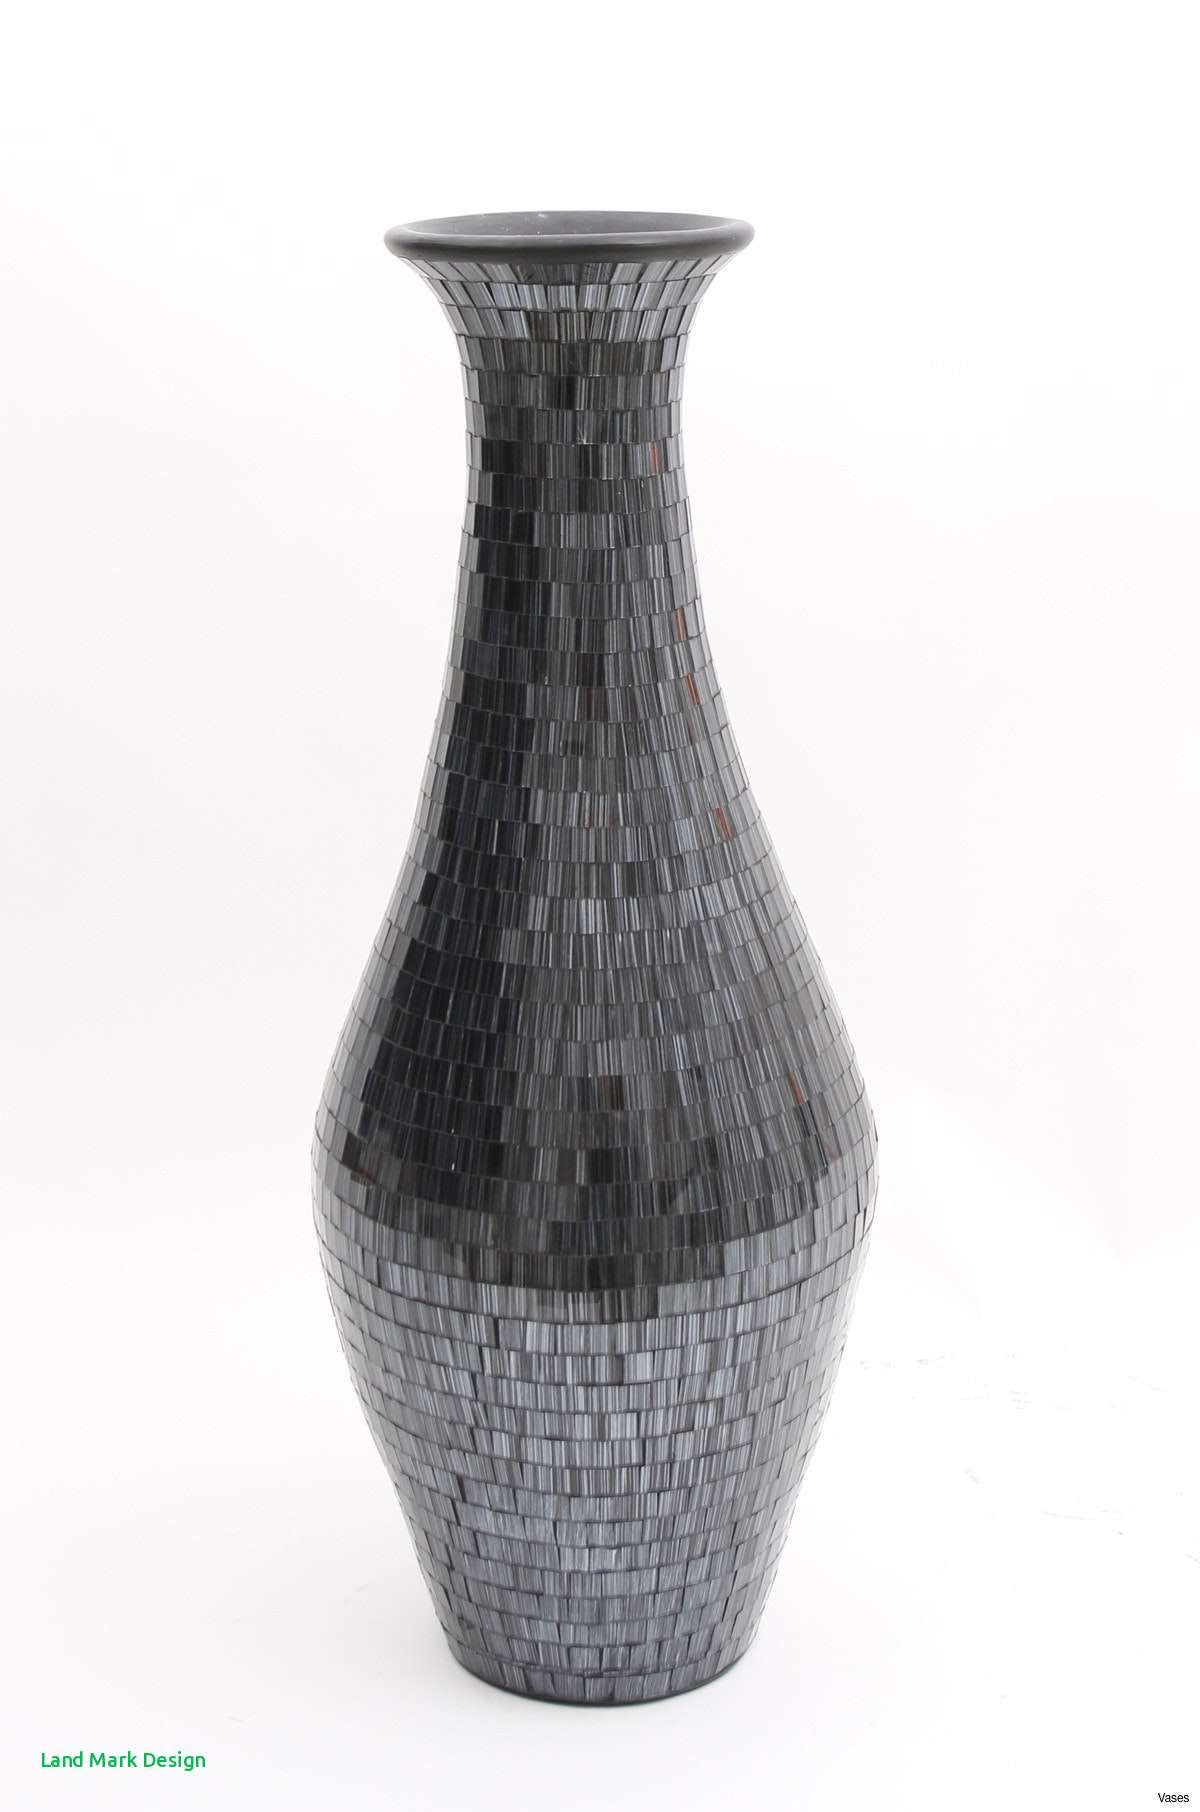 stone vases for sale of 50 smoked glass vase the weekly world within giant vases design